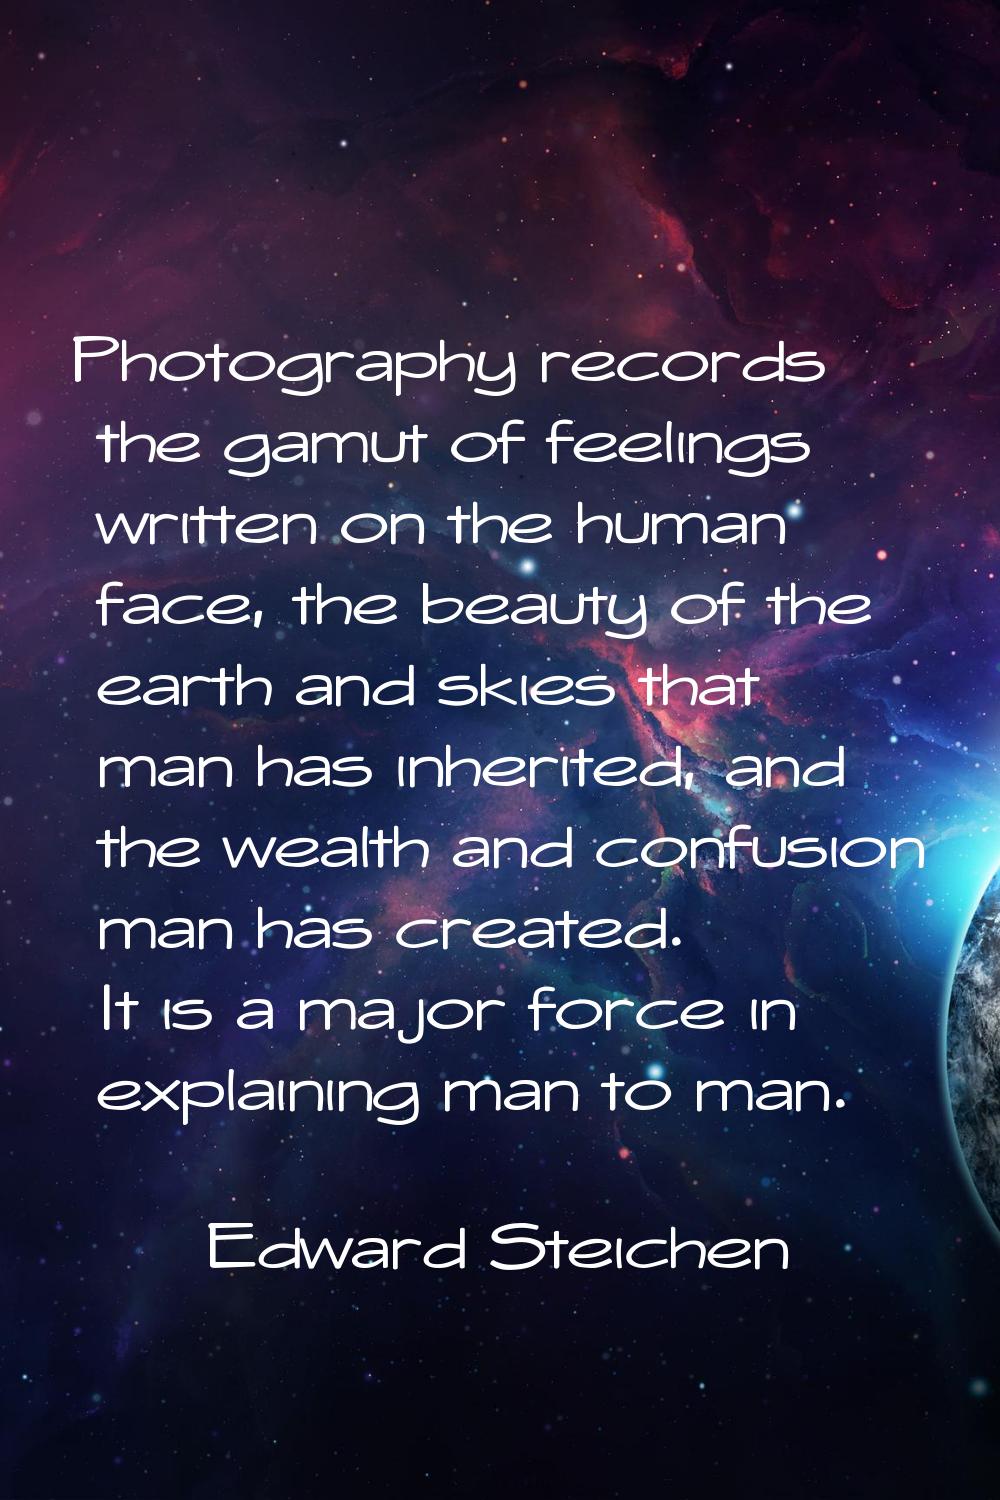 Photography records the gamut of feelings written on the human face, the beauty of the earth and sk